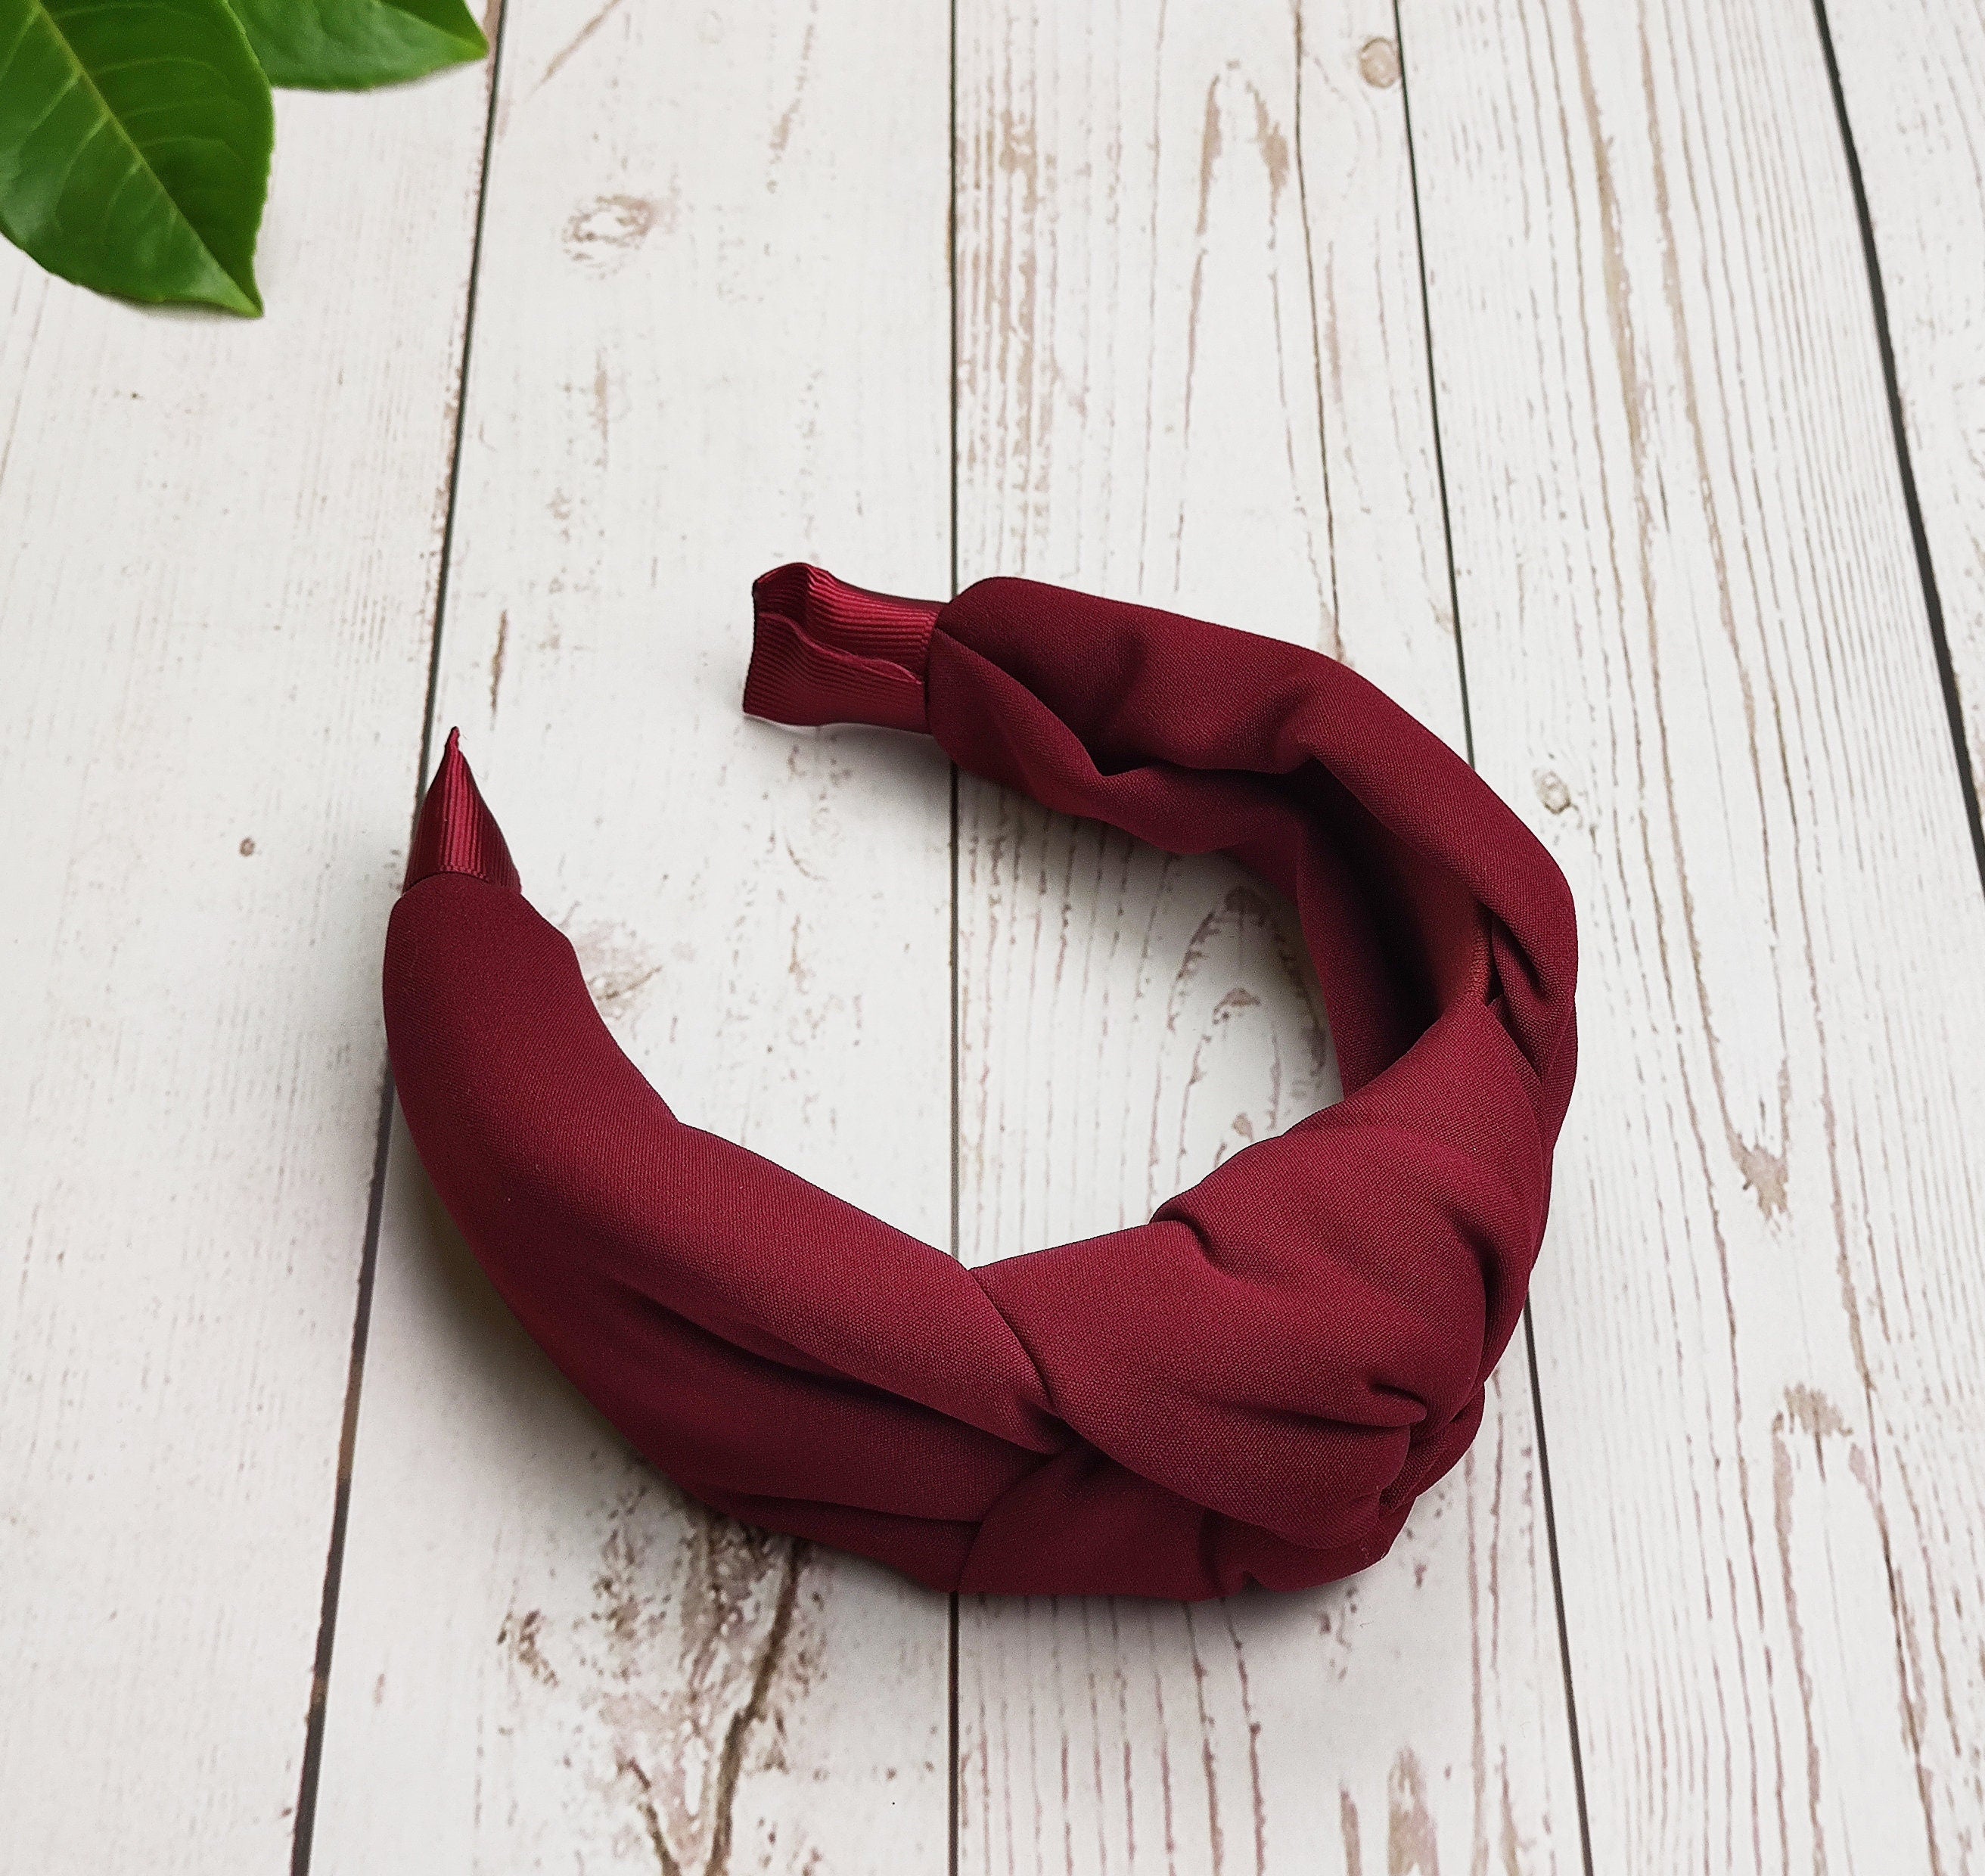 Take a break from everyday life and step into a world of beauty with these stylish and trendy hair accessories. From twisted headbands to Alice bands, find the perfect accessory for yourself in this wide selection of fashionable hairbands.